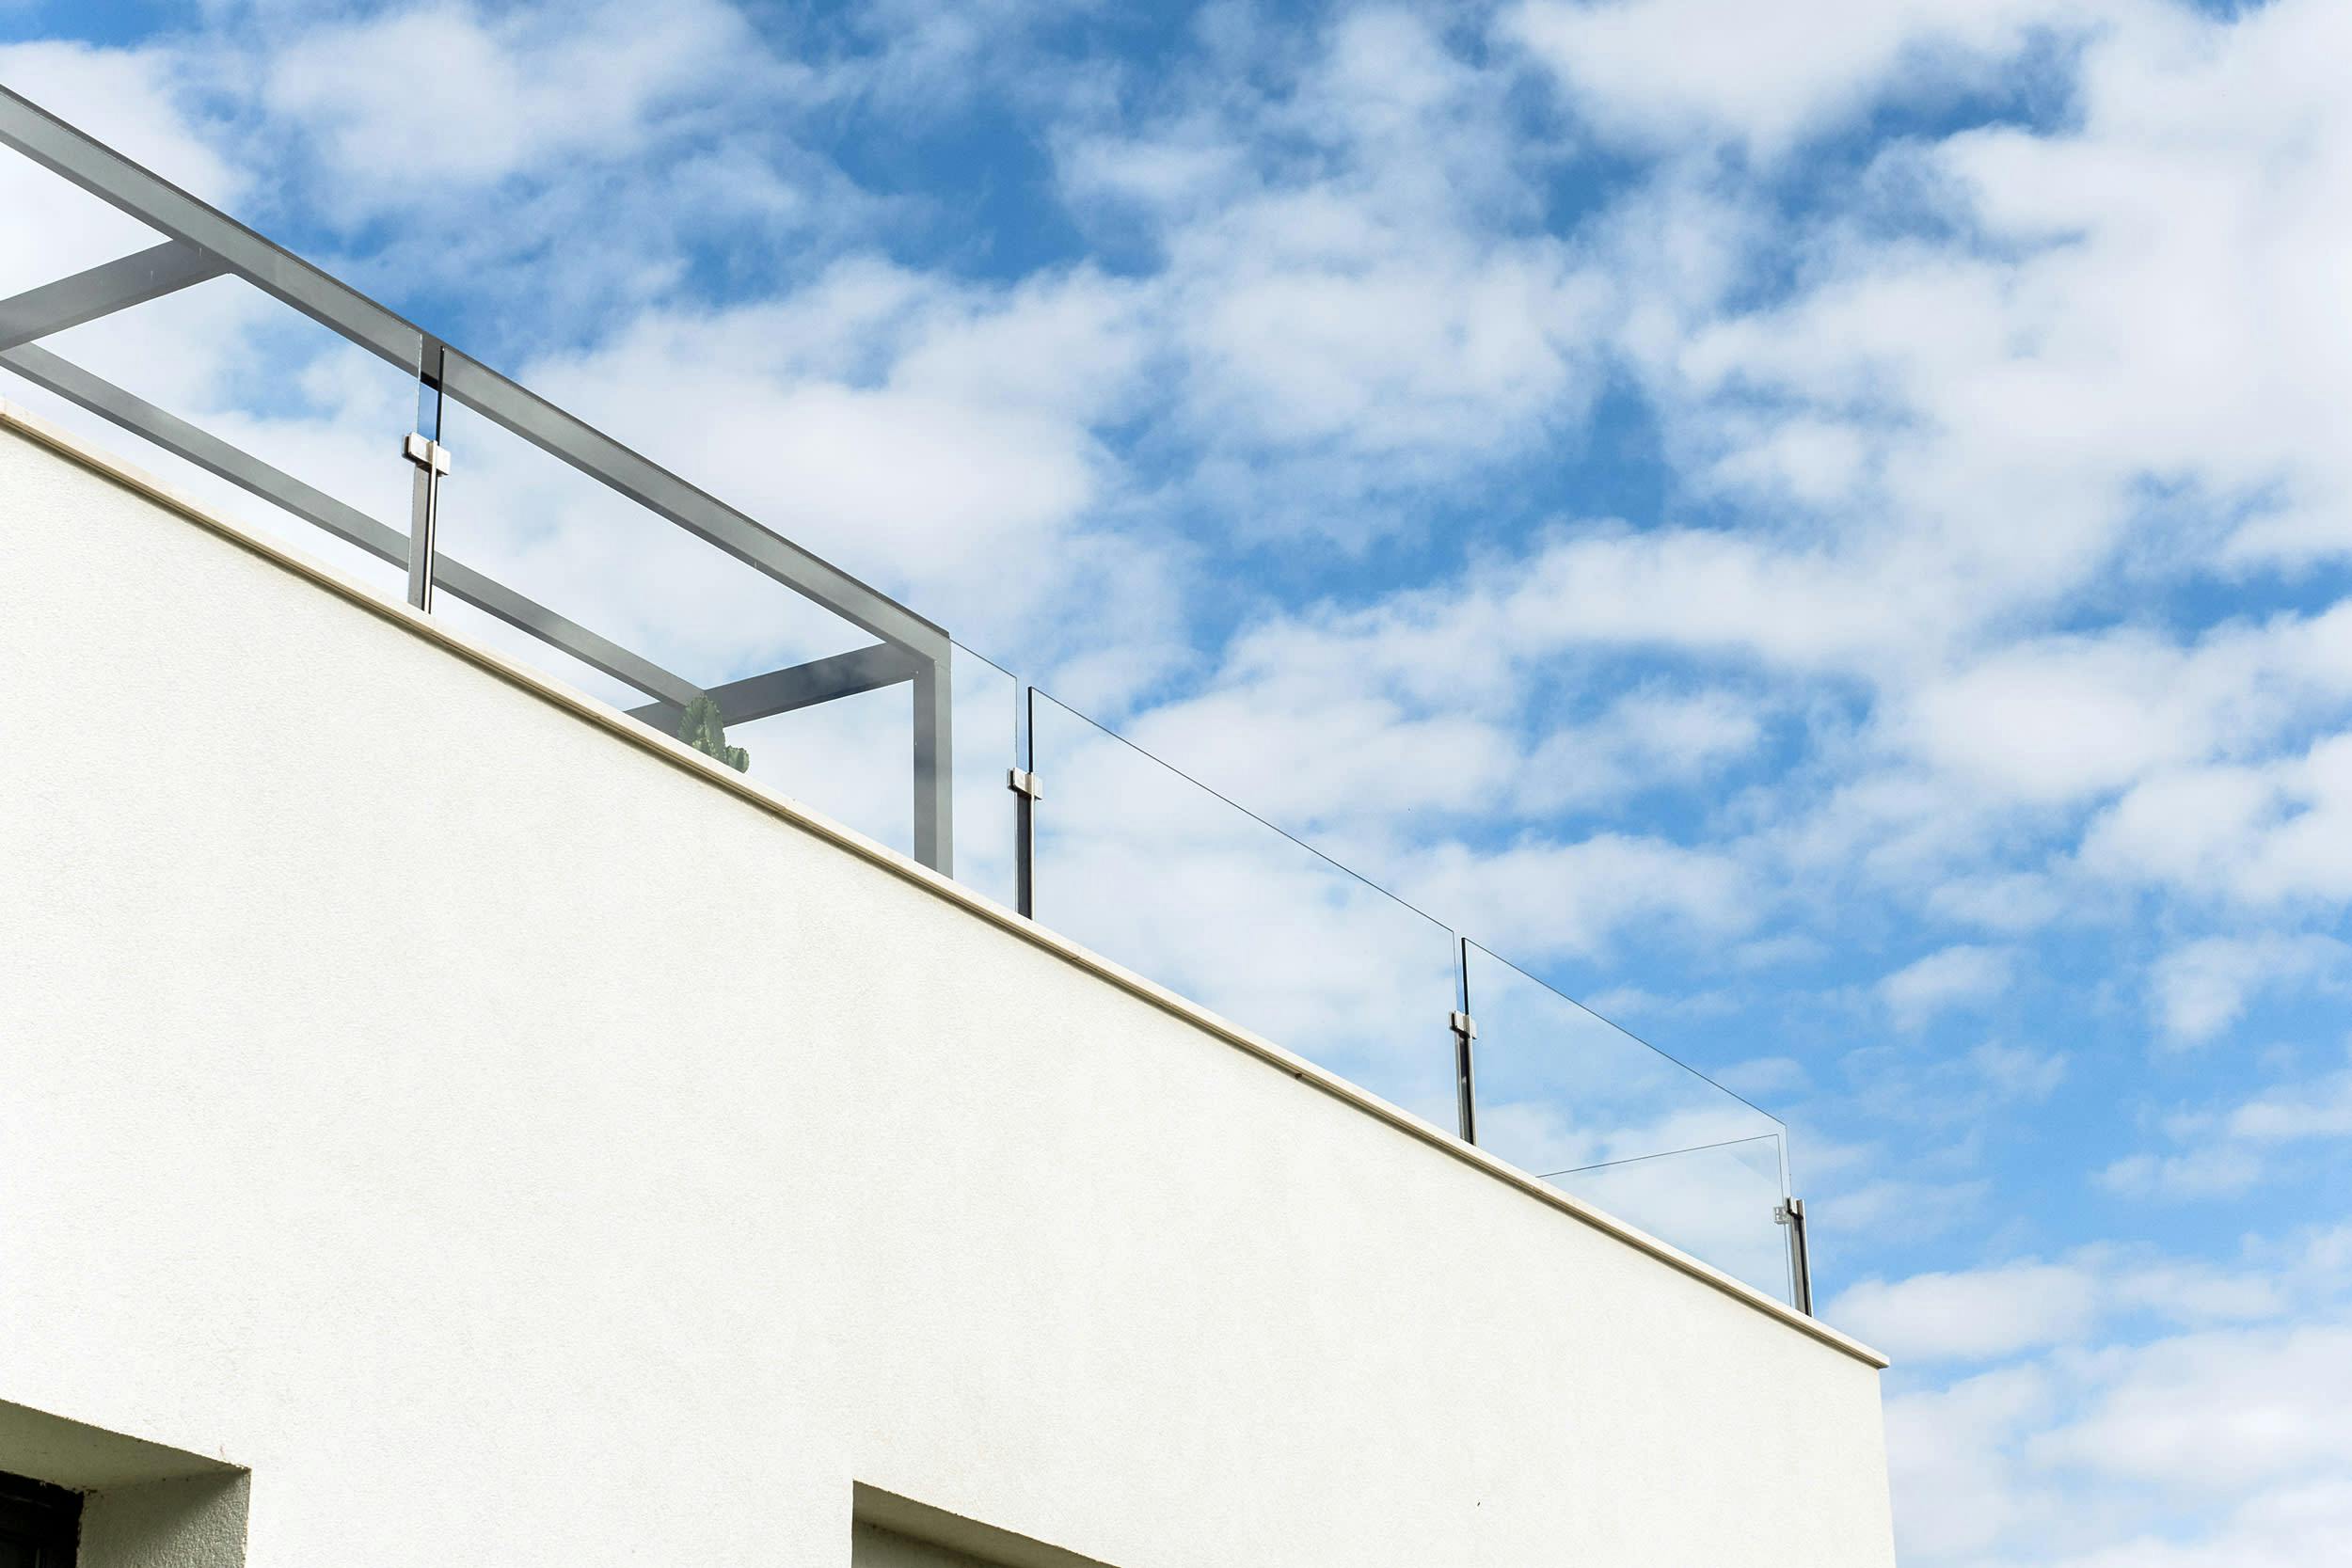 A white building with a metal railing on the side is set against a blue sky with clouds, creating a visually appealing and serene scene.